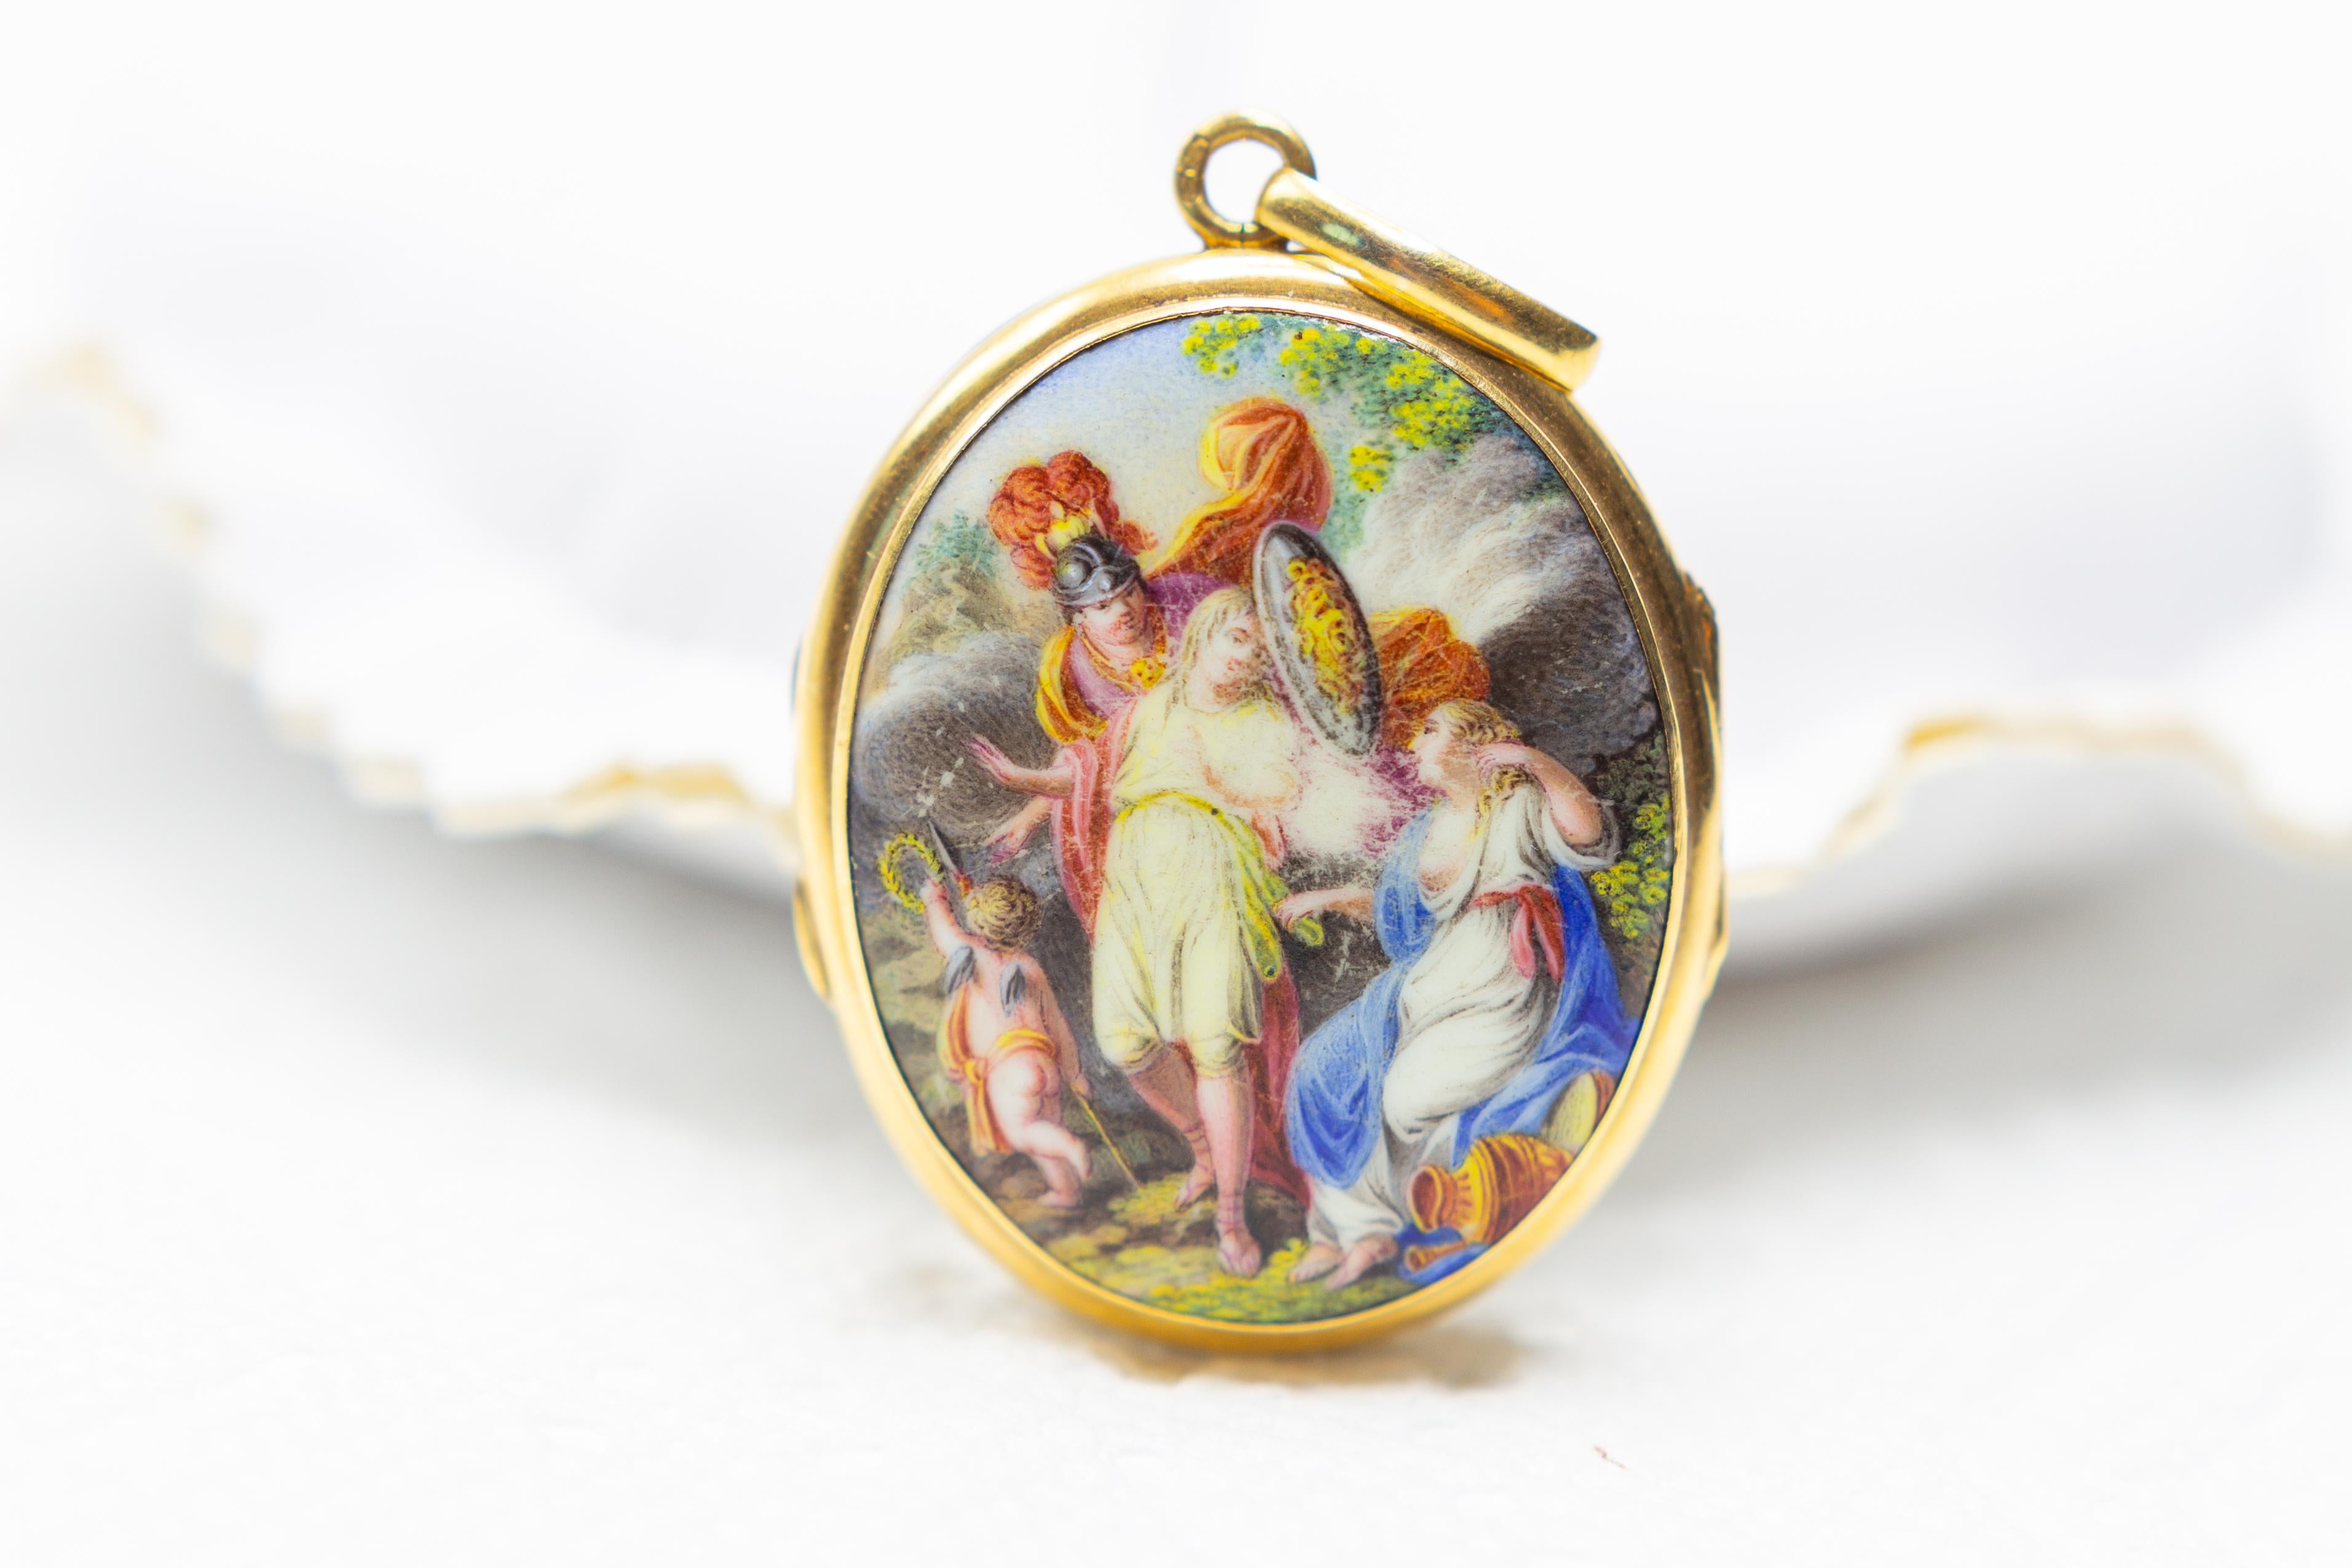 Women's or Men's Antique 1700s Gold Miniature Pendant with Greek Mythology Perseus Andromeda For Sale